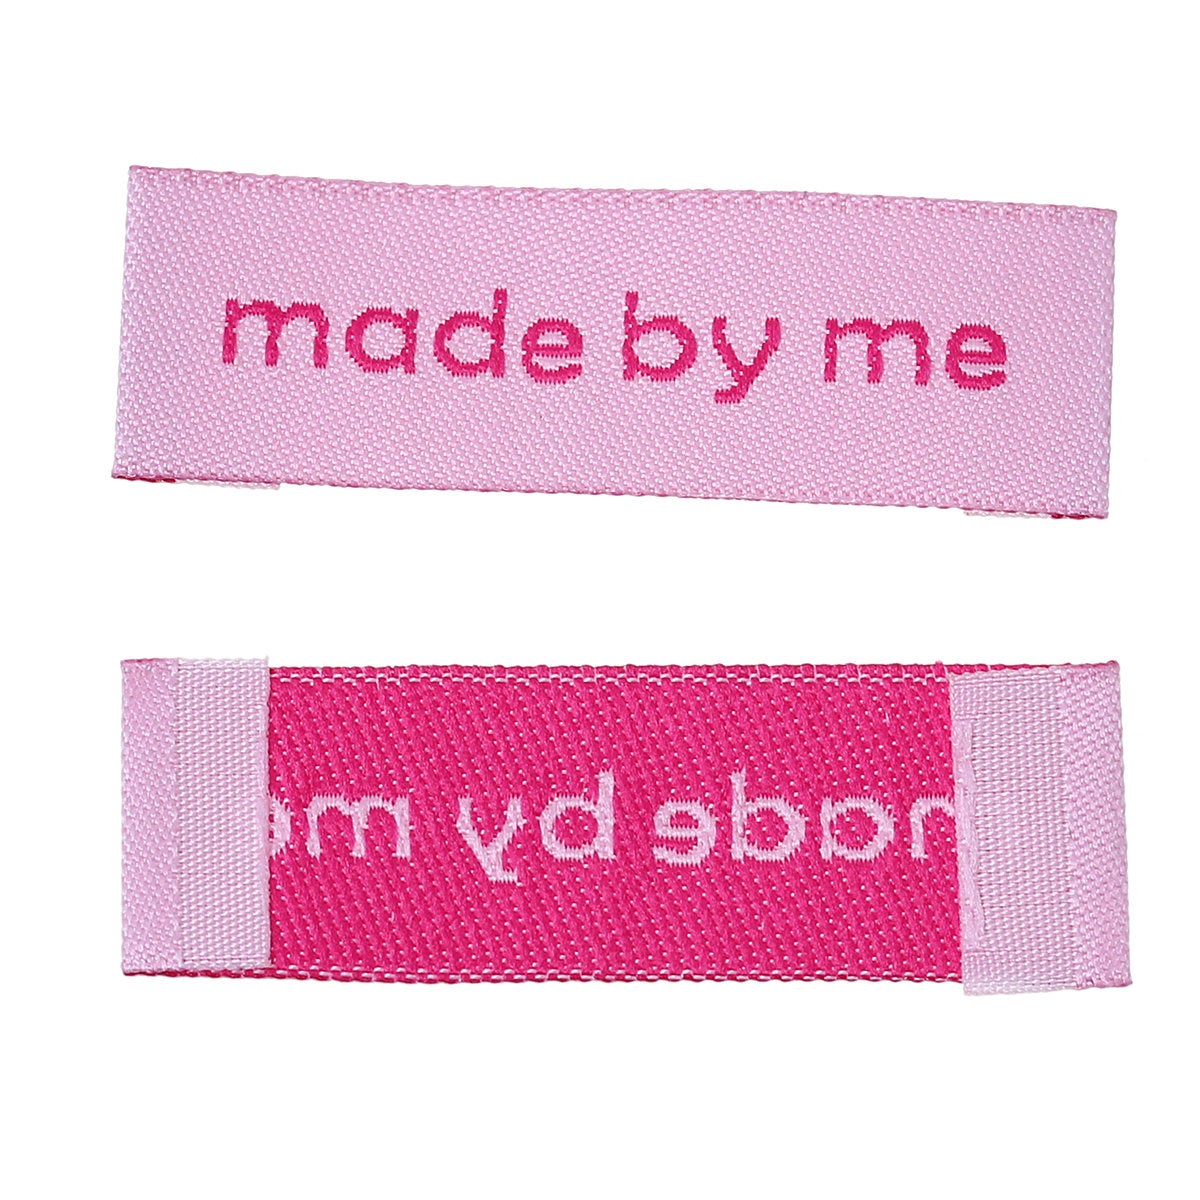 10 Pink woven printed sewing labels - different styles for choice